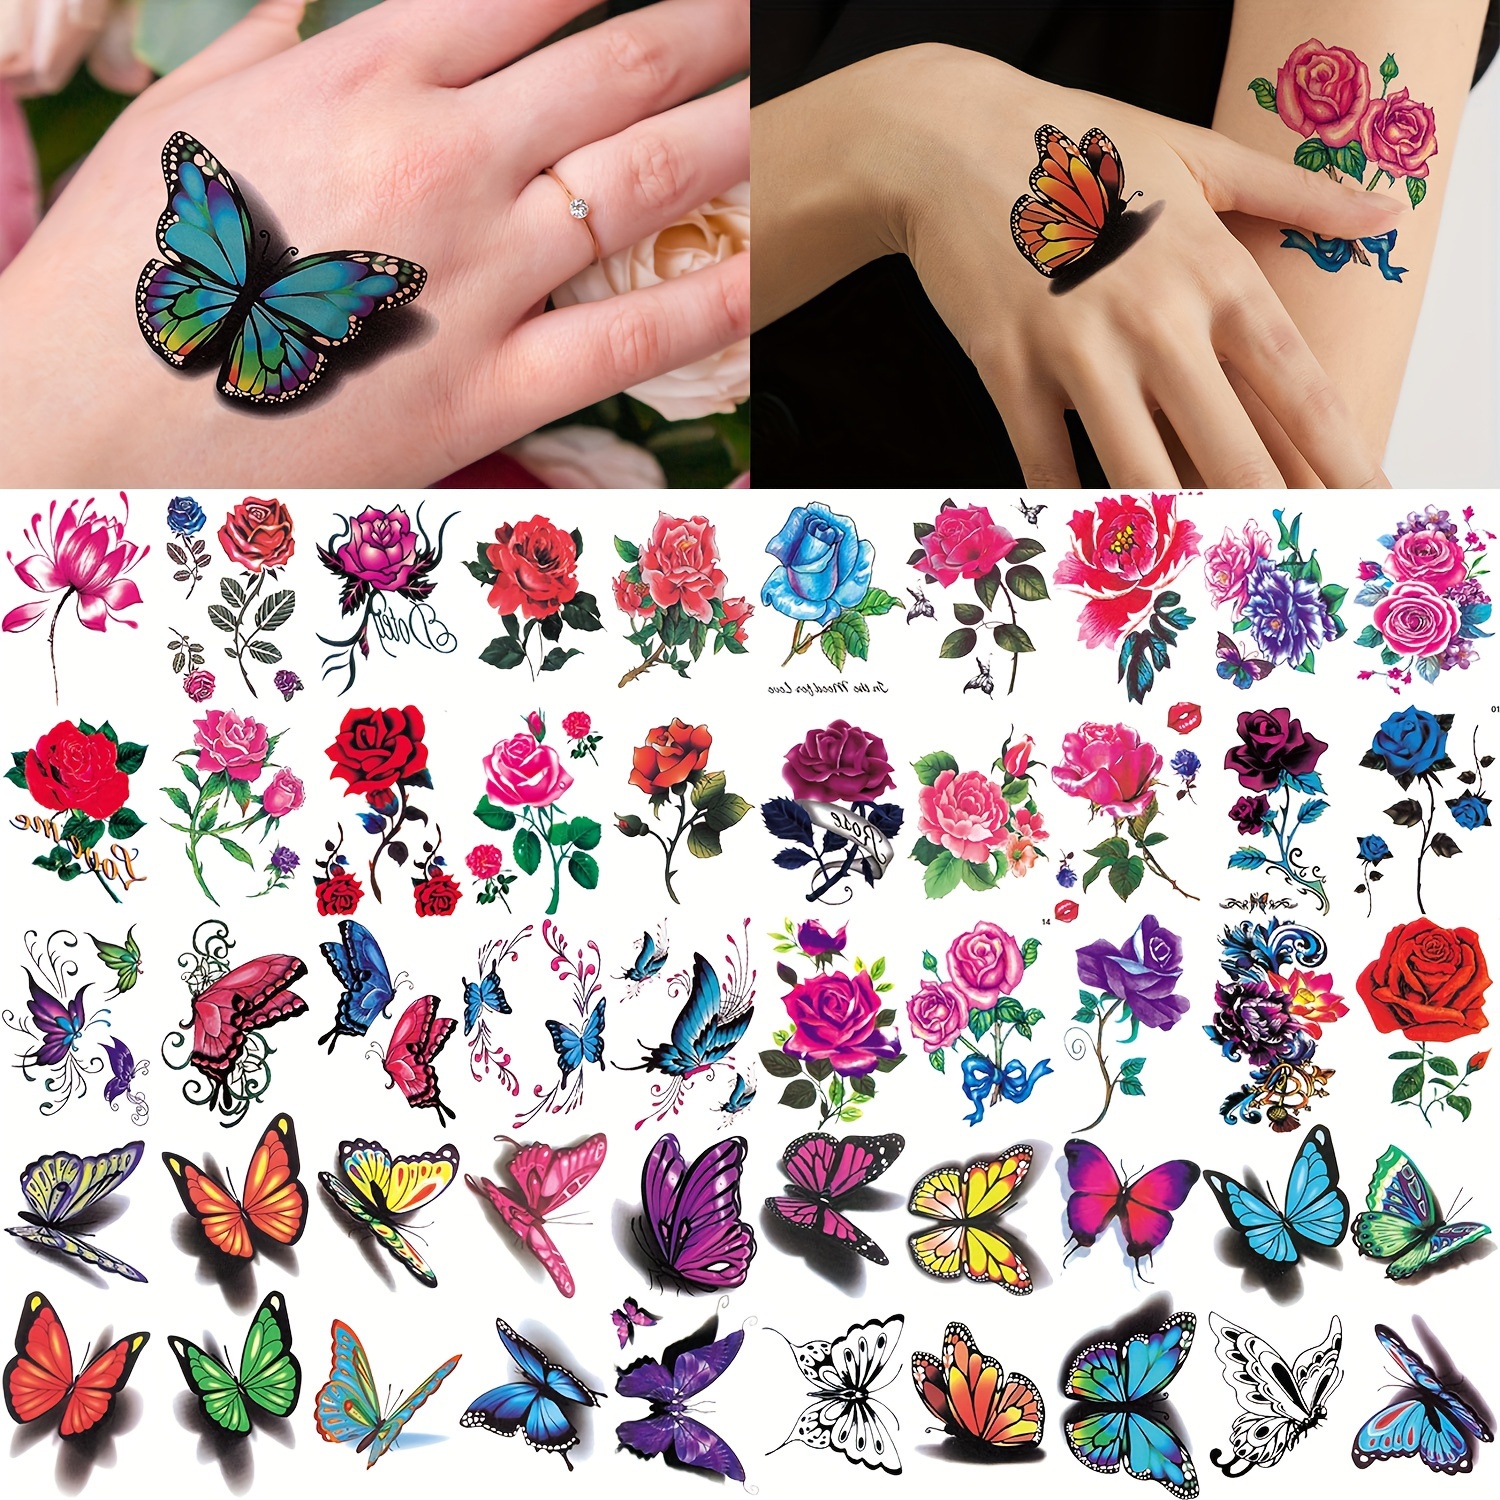 

50pcs Oblong Temporary Tattoos For Women And Girls, Waterproof 3d Flower And Butterfly Fake Tattoo Stickers, Colorful Body Art Sleeve Decor.